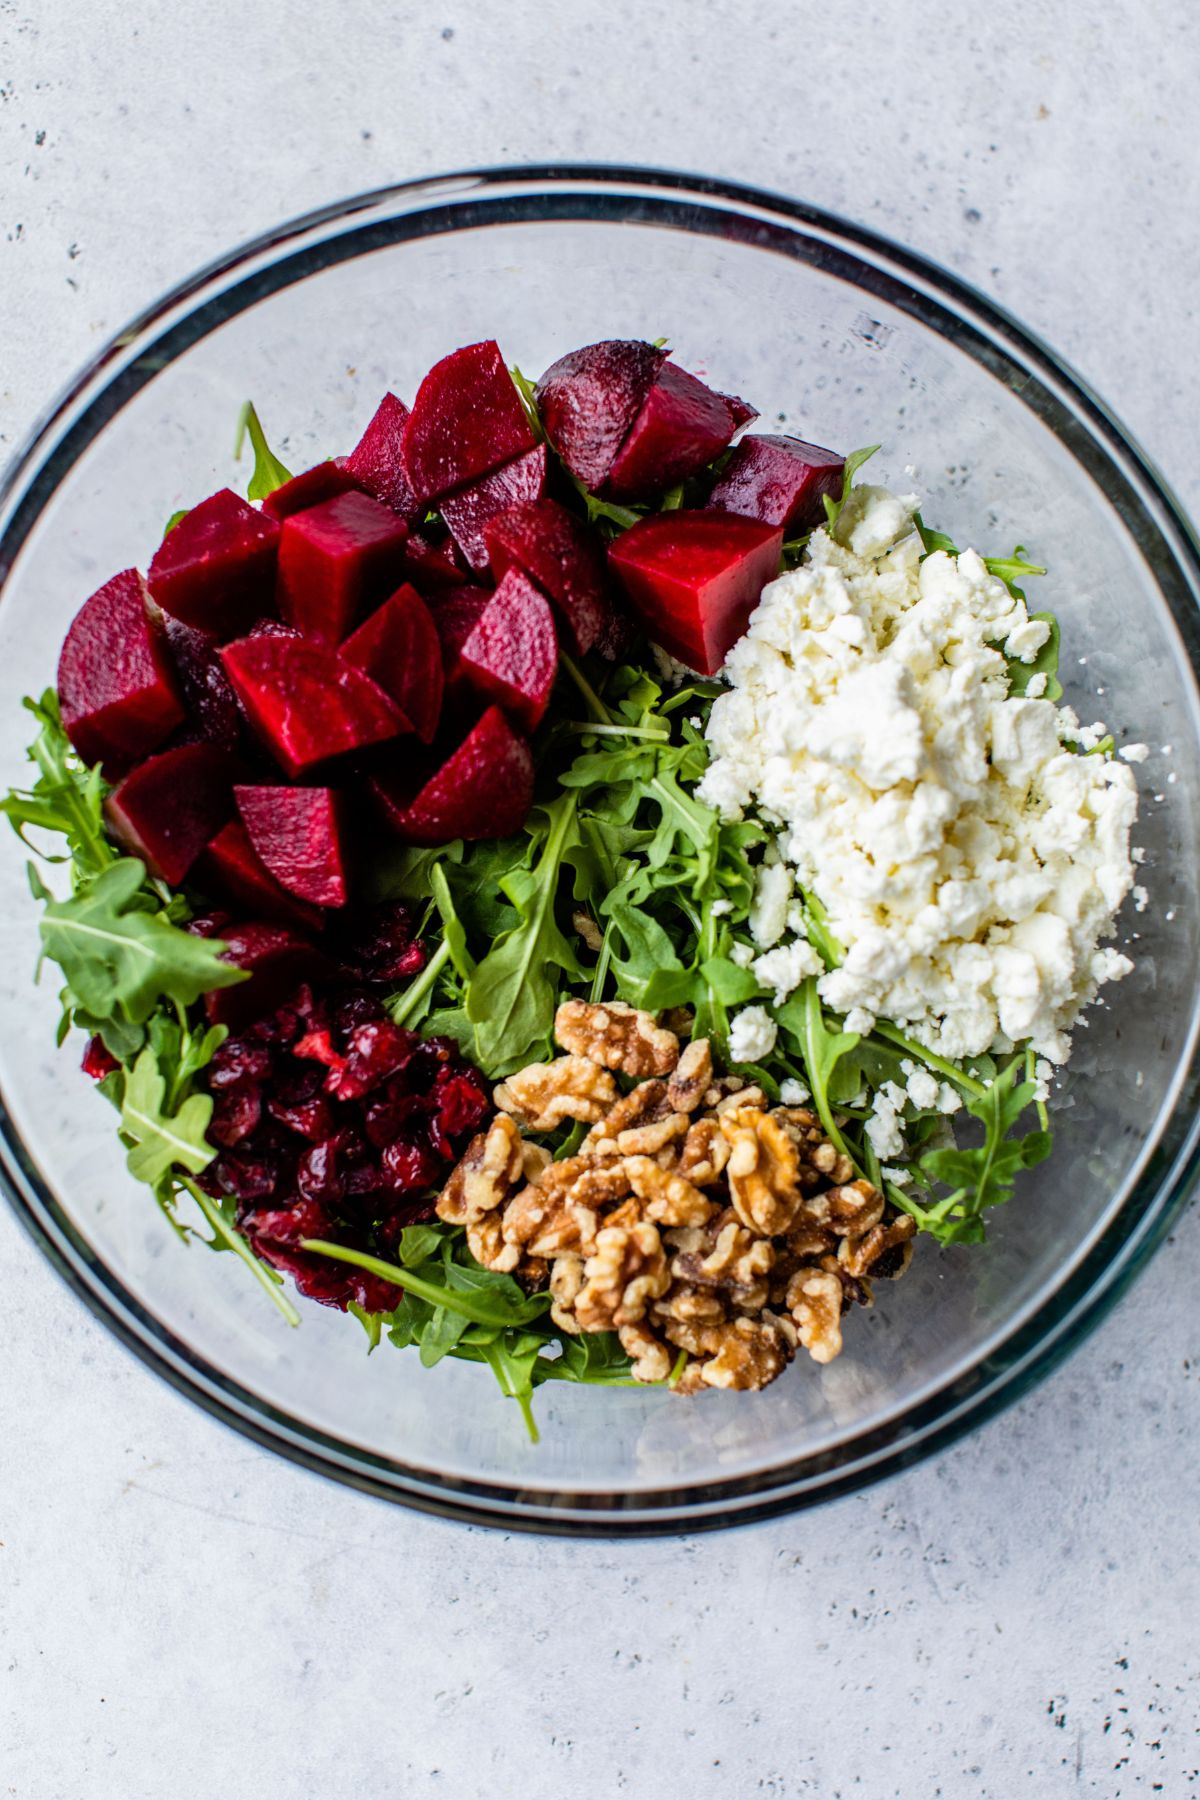 Steamed beets, arugula, goat cheese and walnuts added to a large bowl.